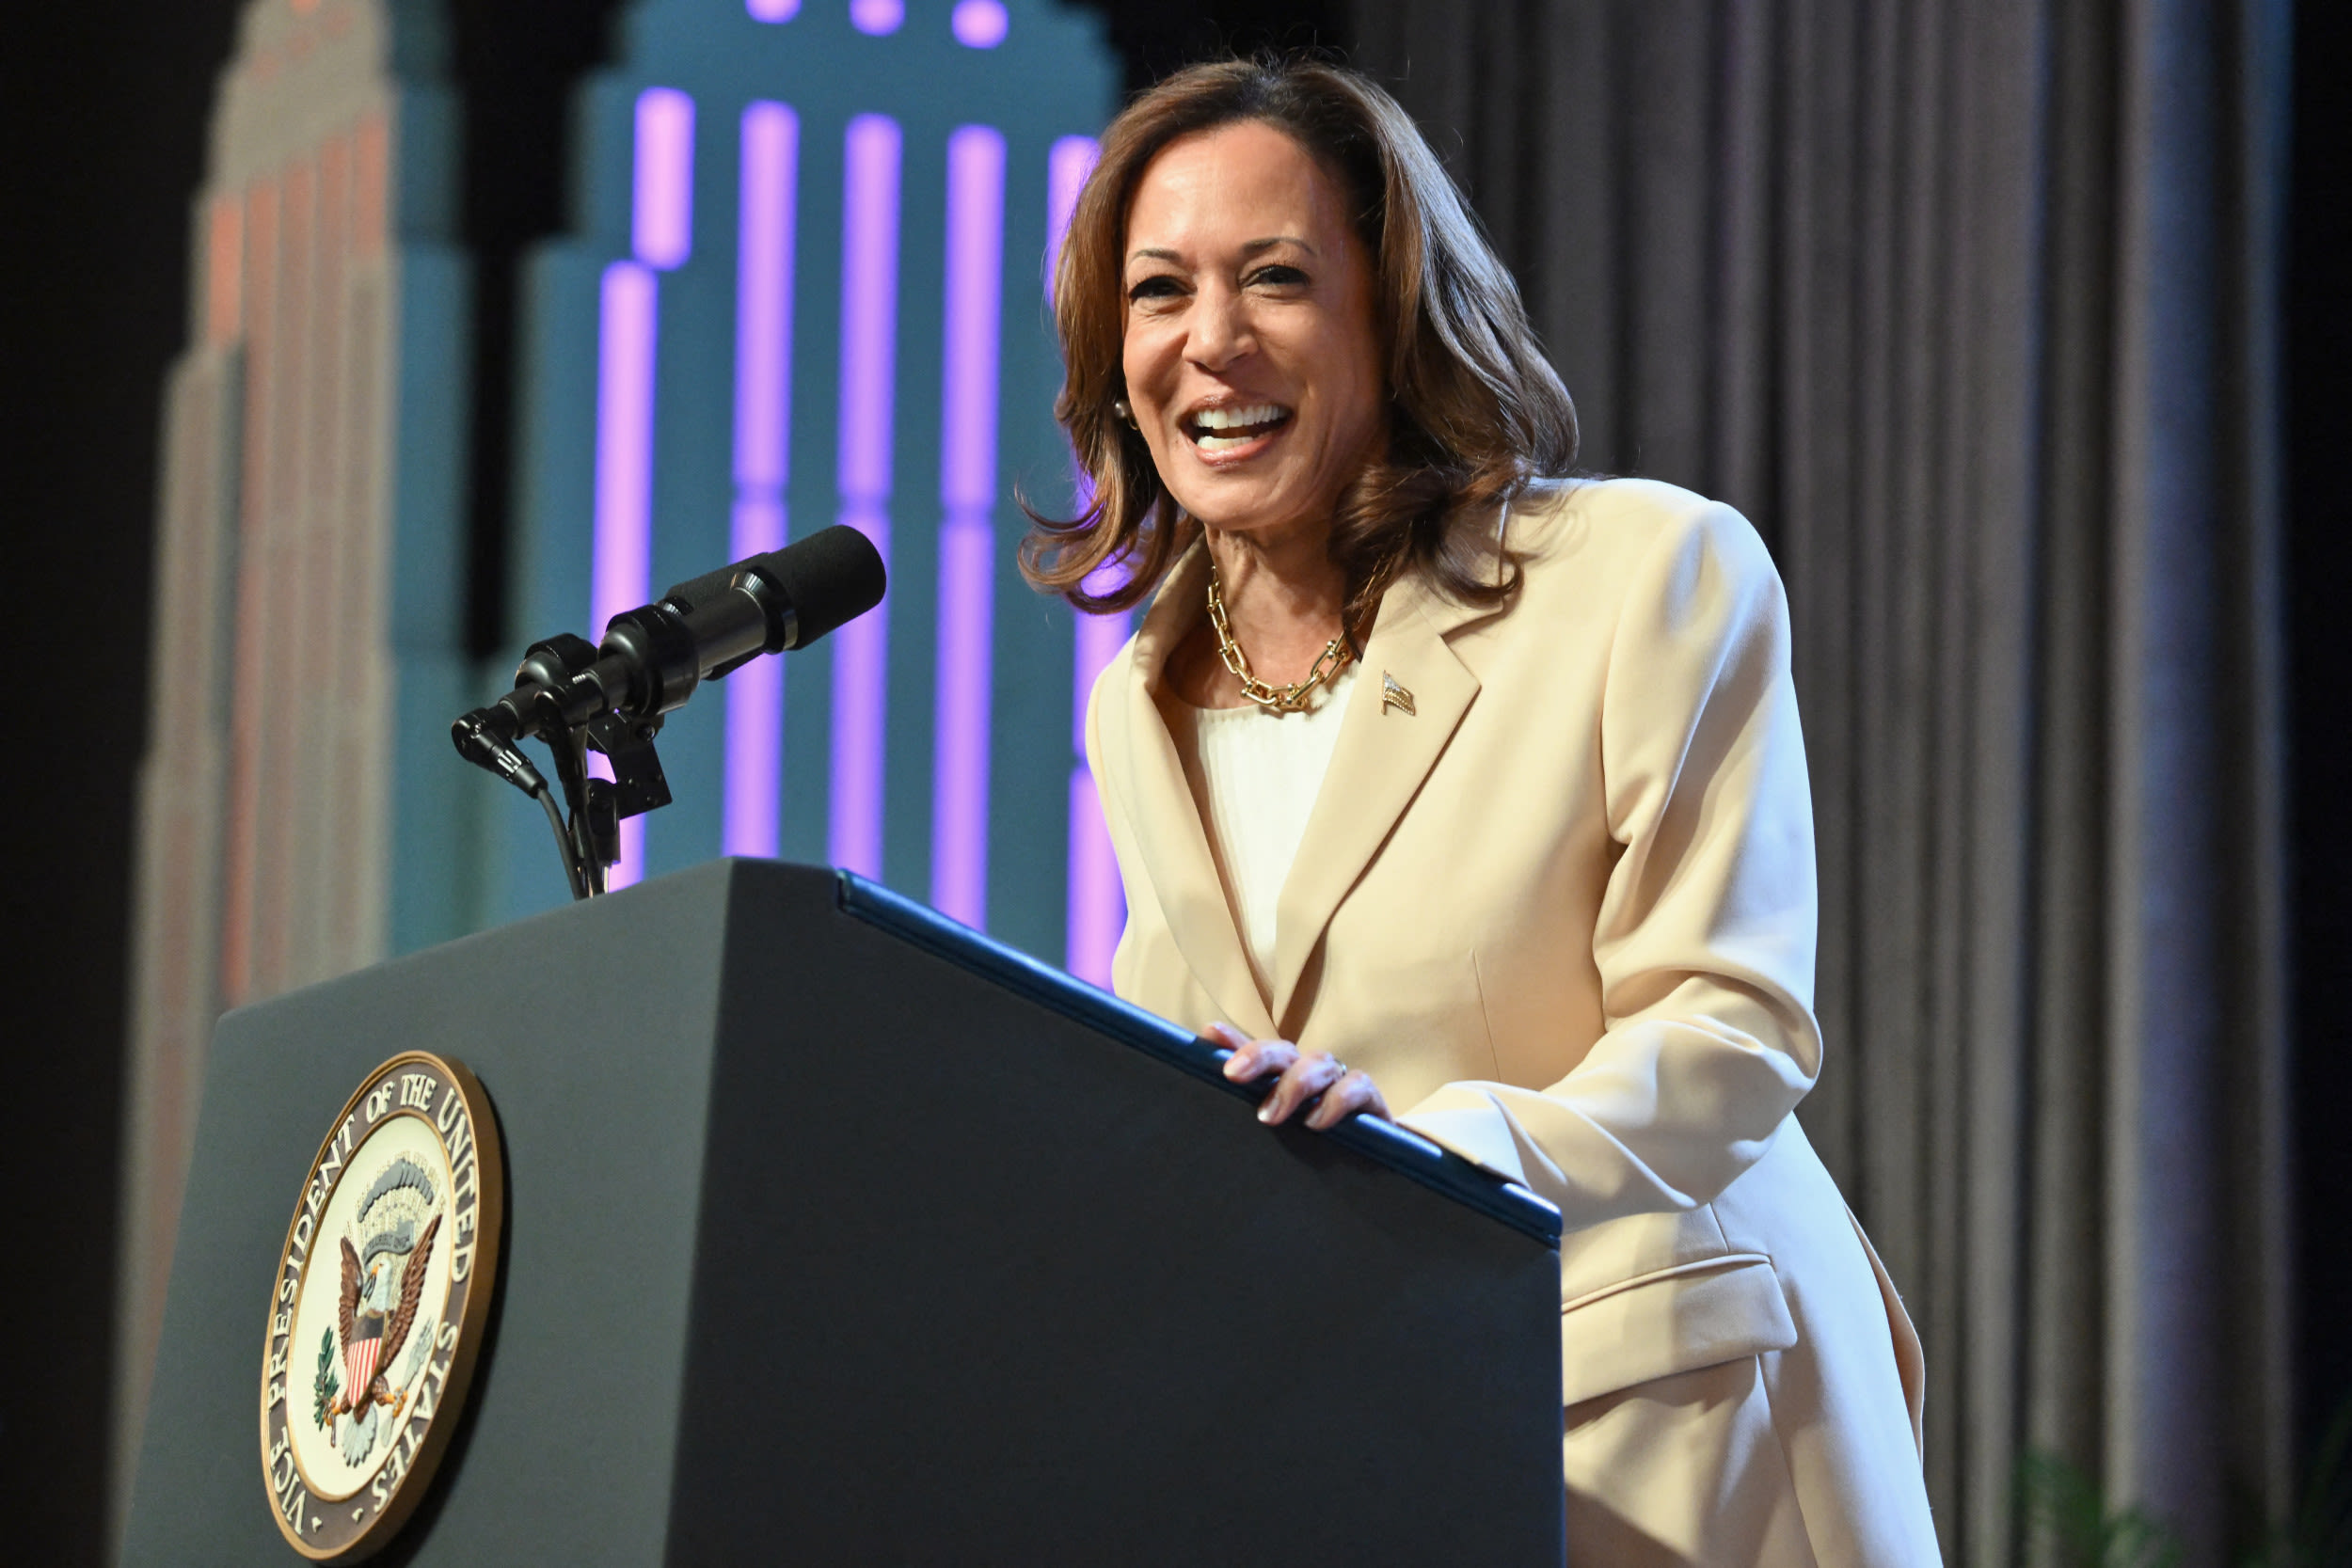 Kamala Harris "changes the game" with these VP picks, Trump ally warns